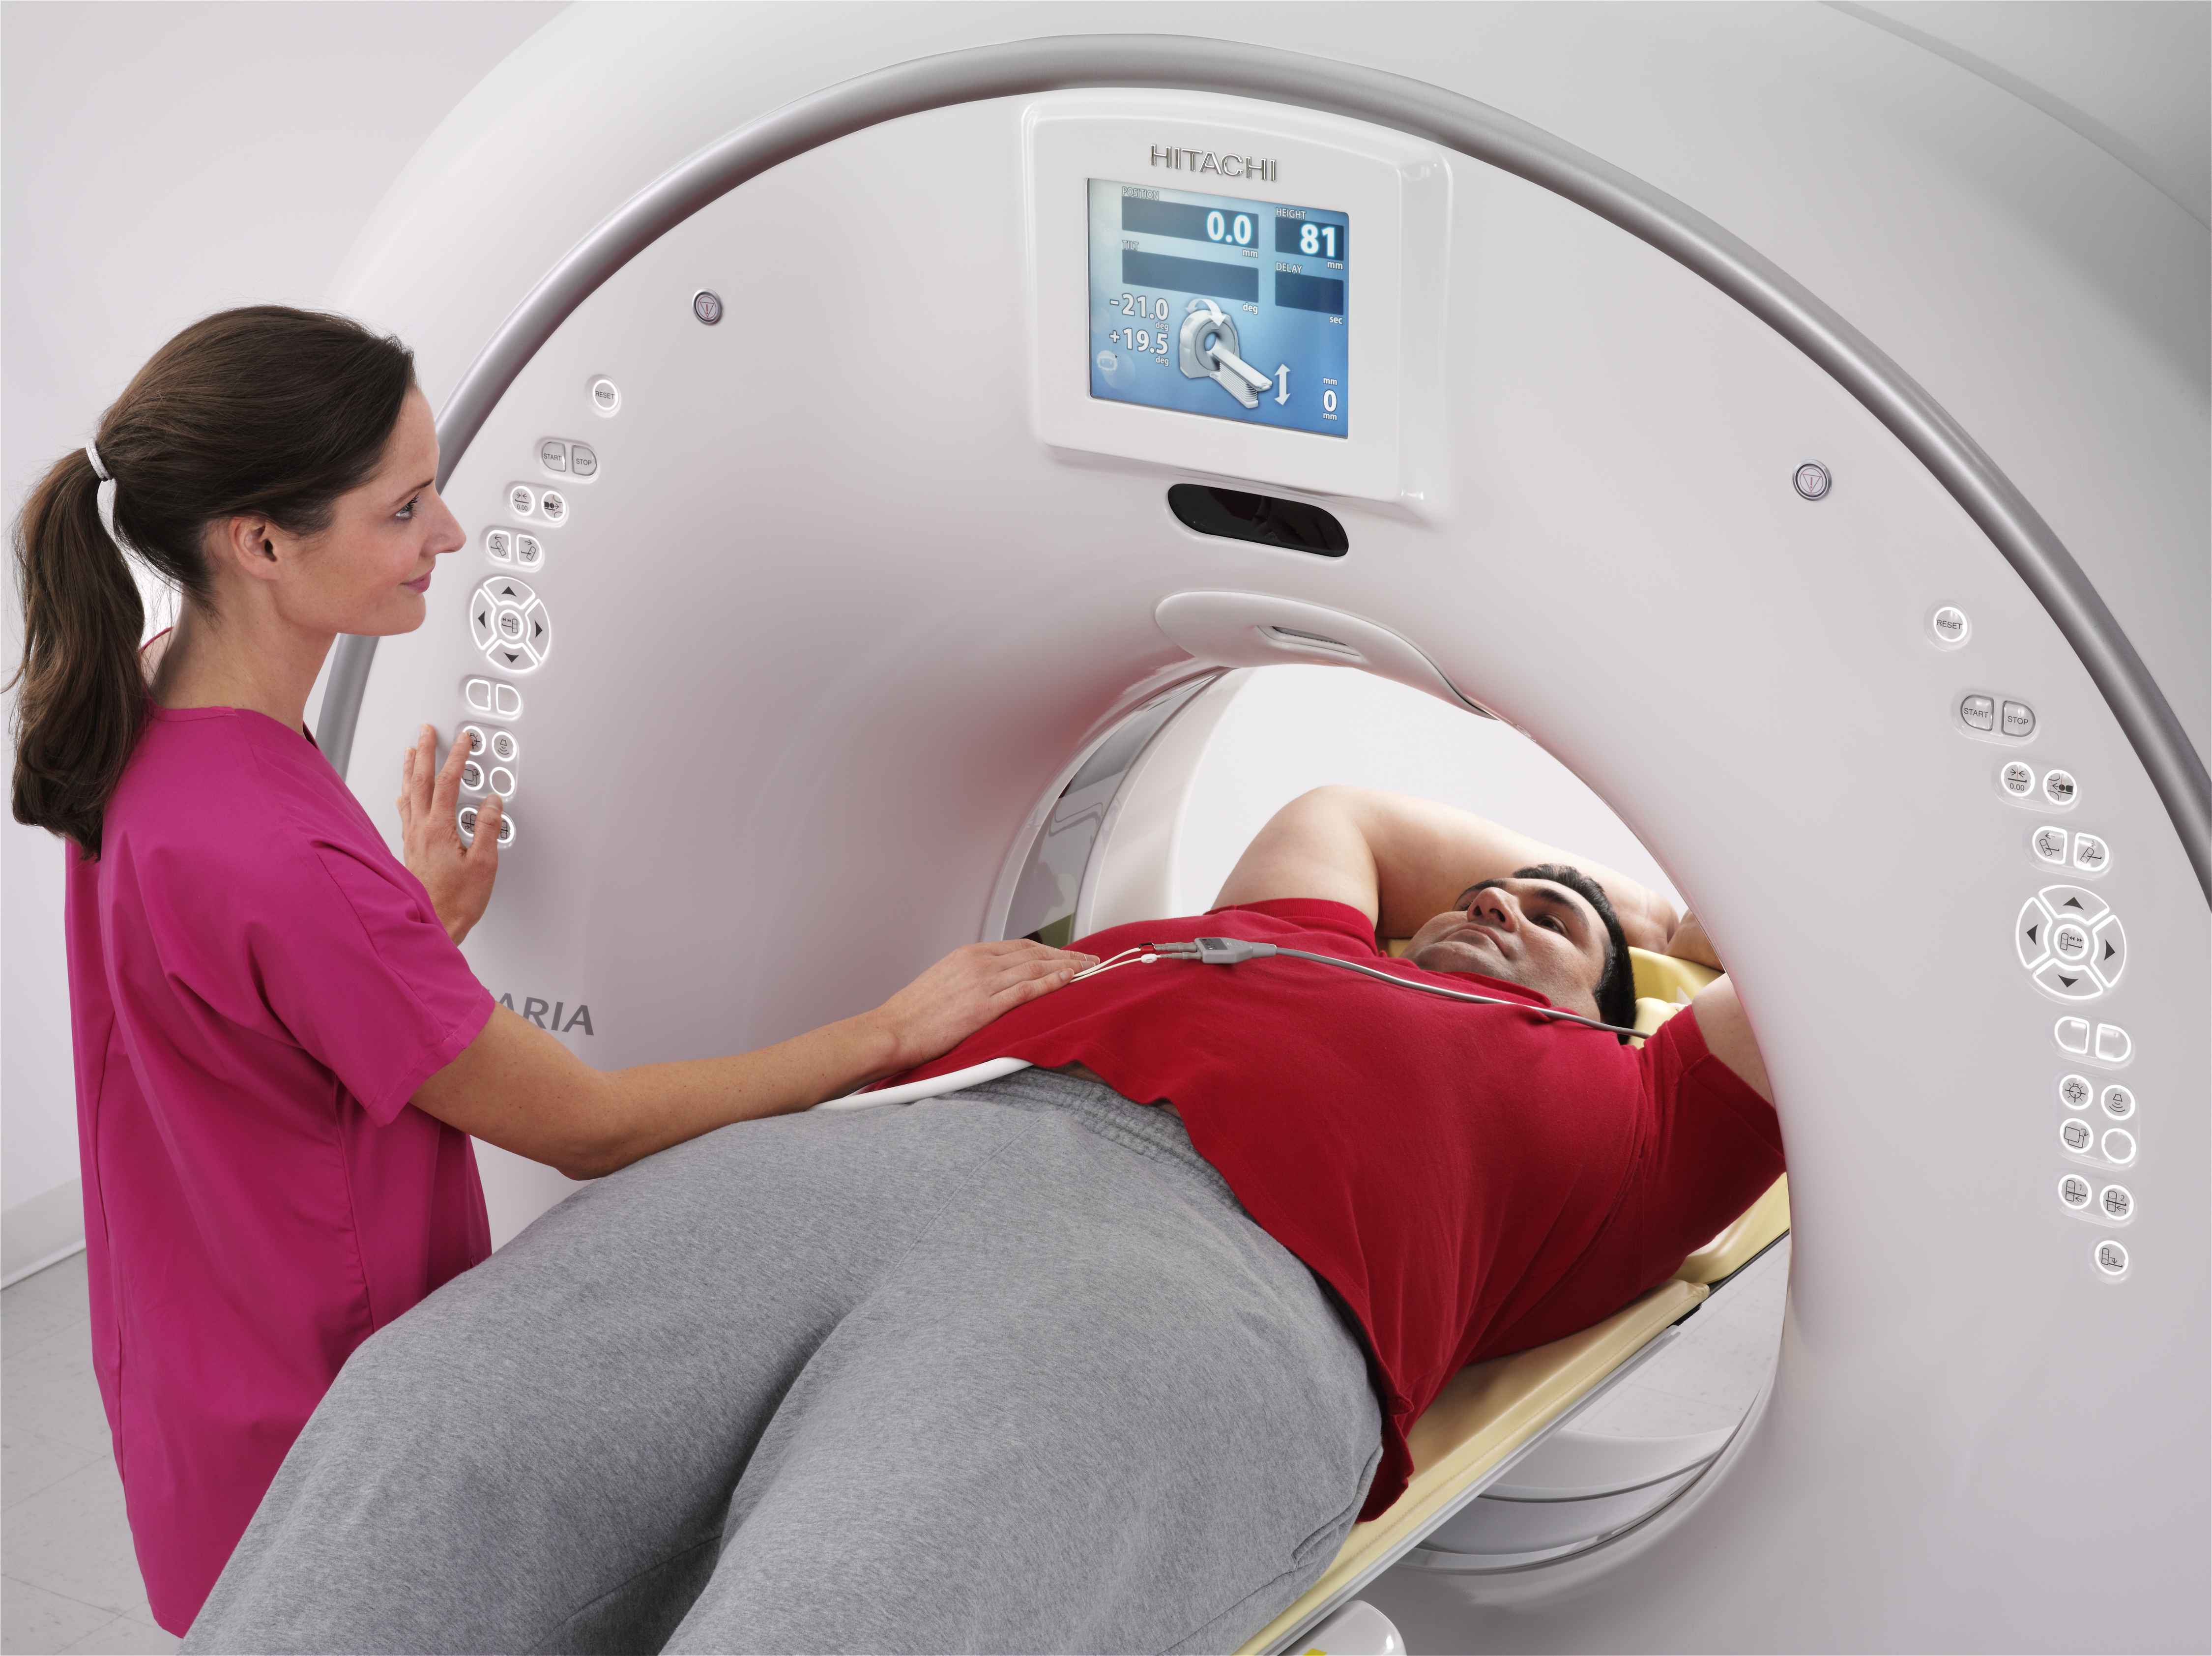 Image: New Scenaria SE 64/128-slice Computed Tomography Scanner from Hitachi Medical Systems America (Photo courtesy of Business Wire).